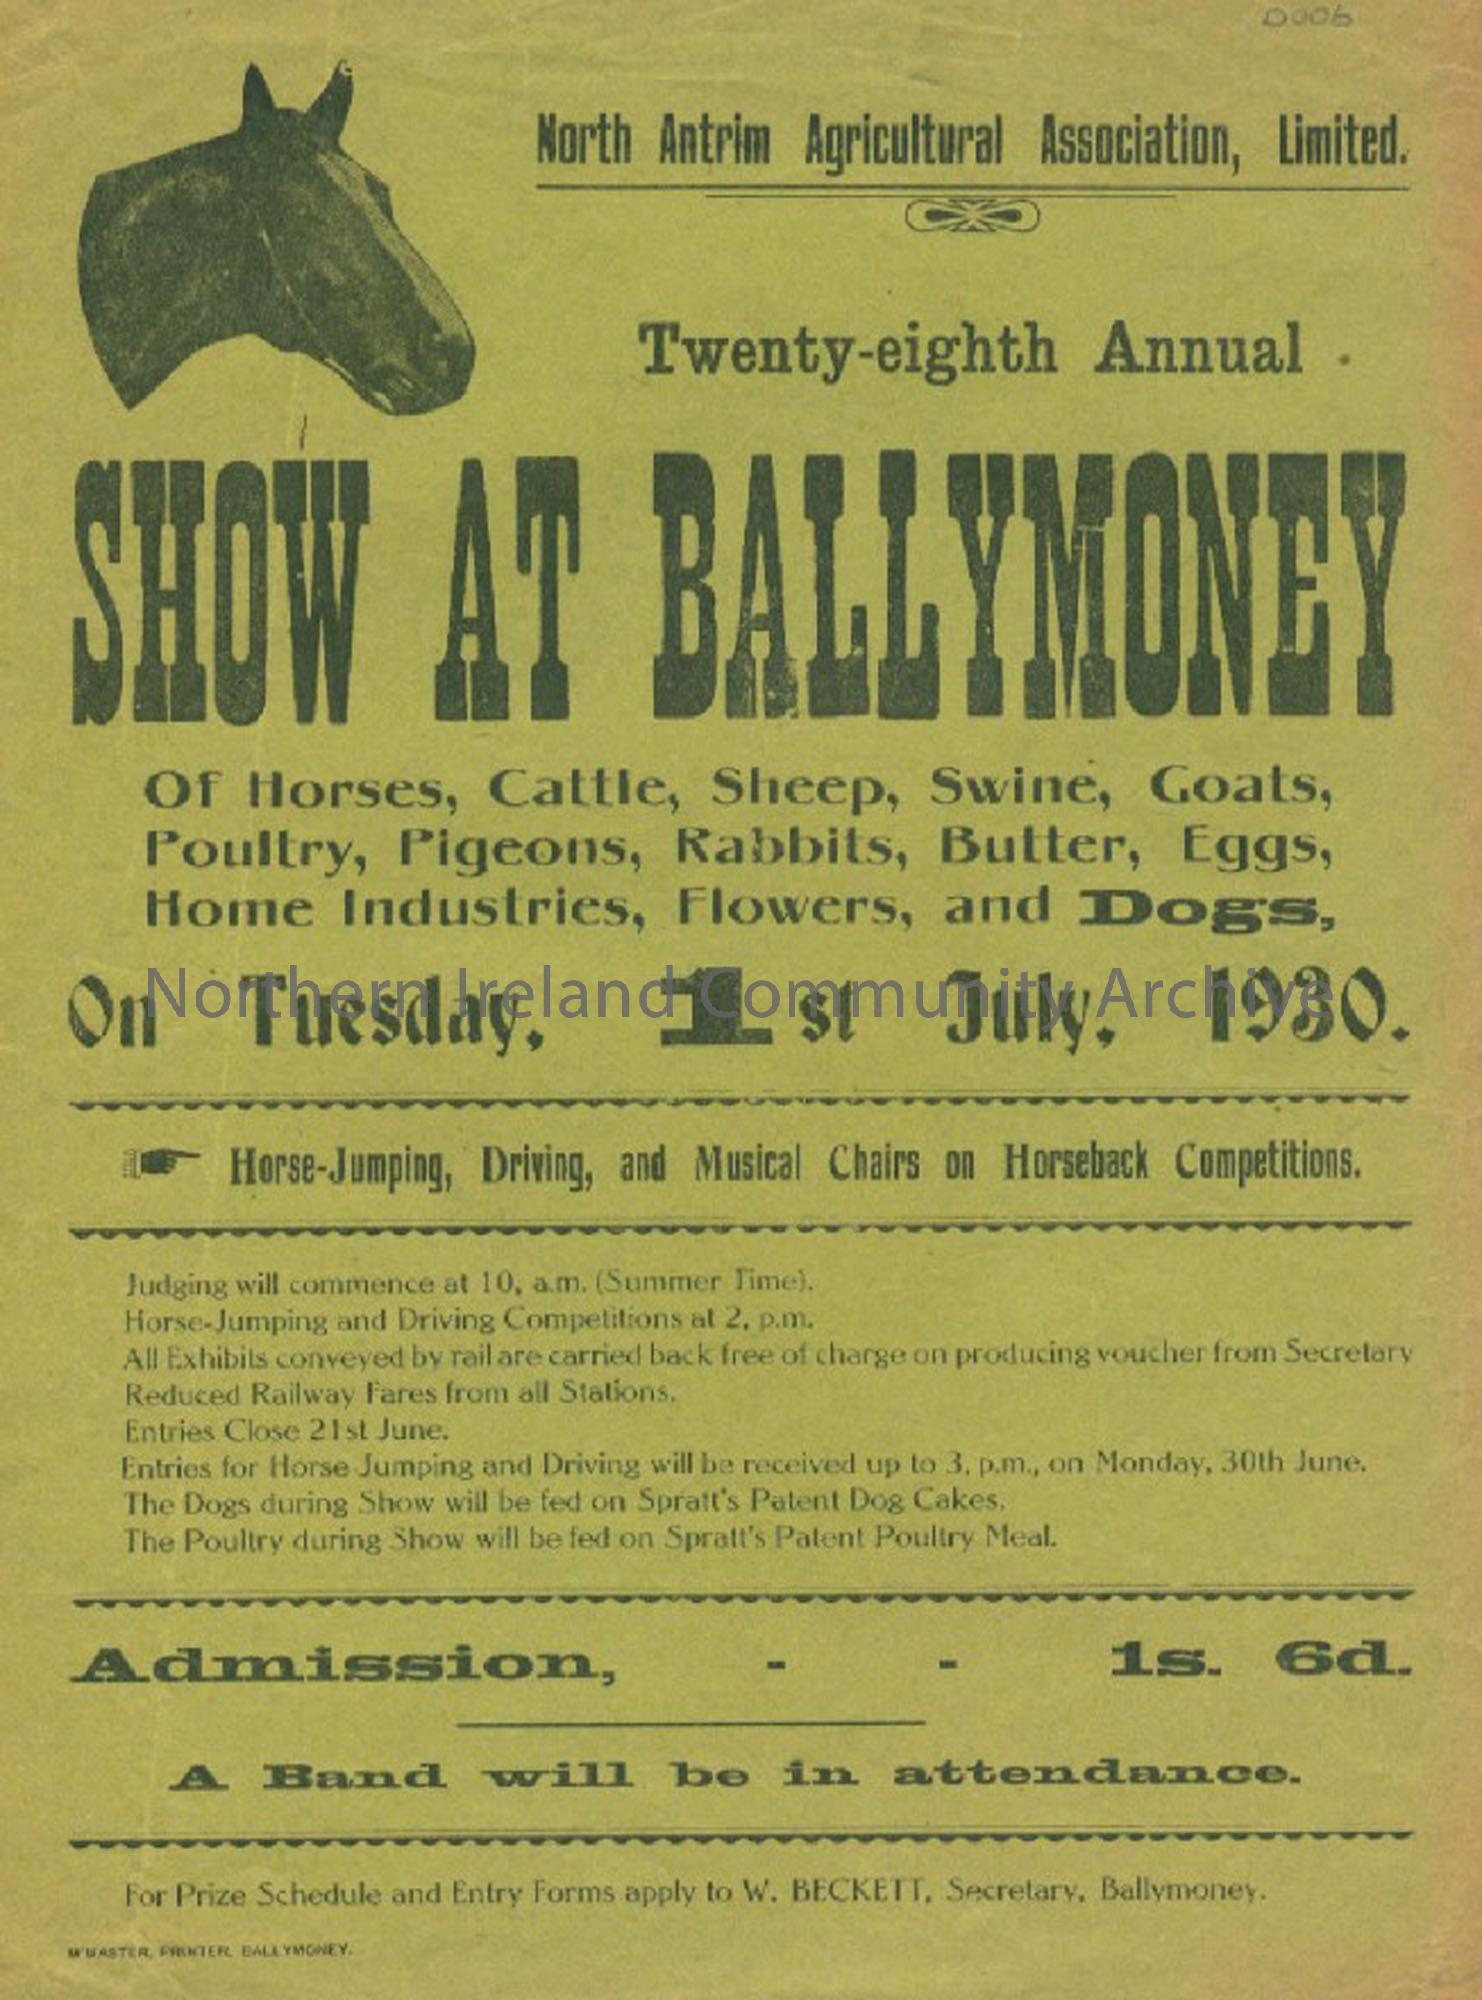 Ballymoney Show Poster, Tuesday 1st July, 1930. Poster on green paper with image of horse’s head on top left corner. Outlines the day’s programme